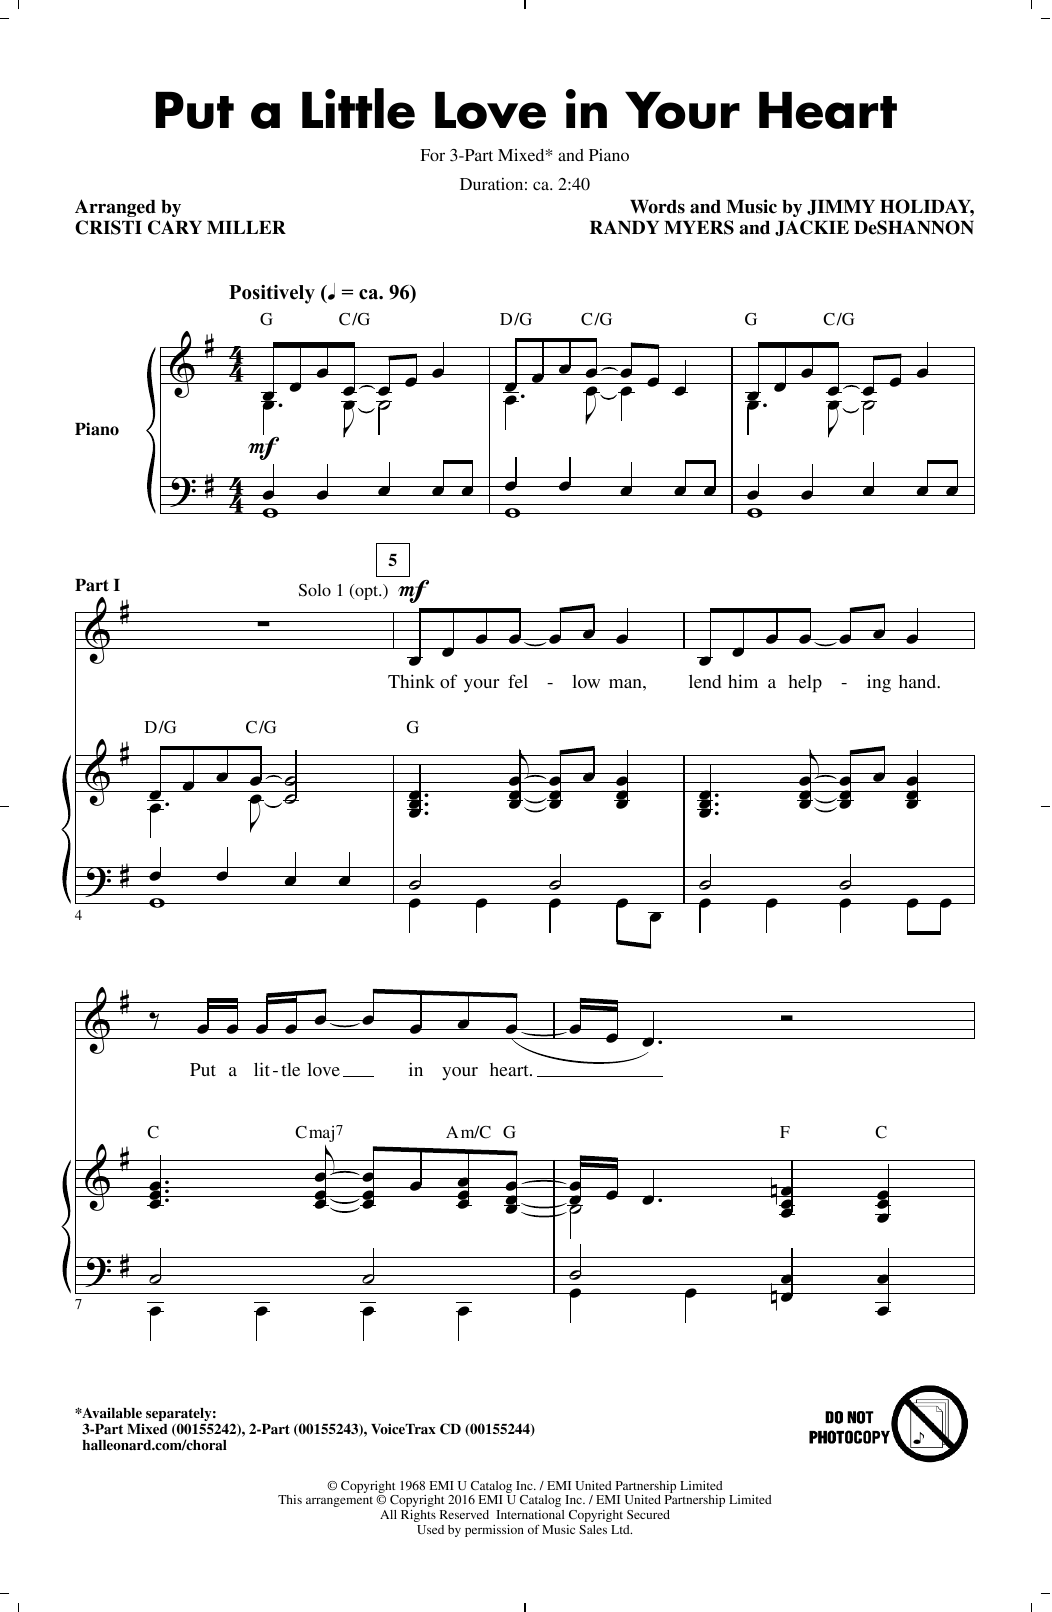 Download Cristi Cary Miller Put A Little Love In Your Heart Sheet Music